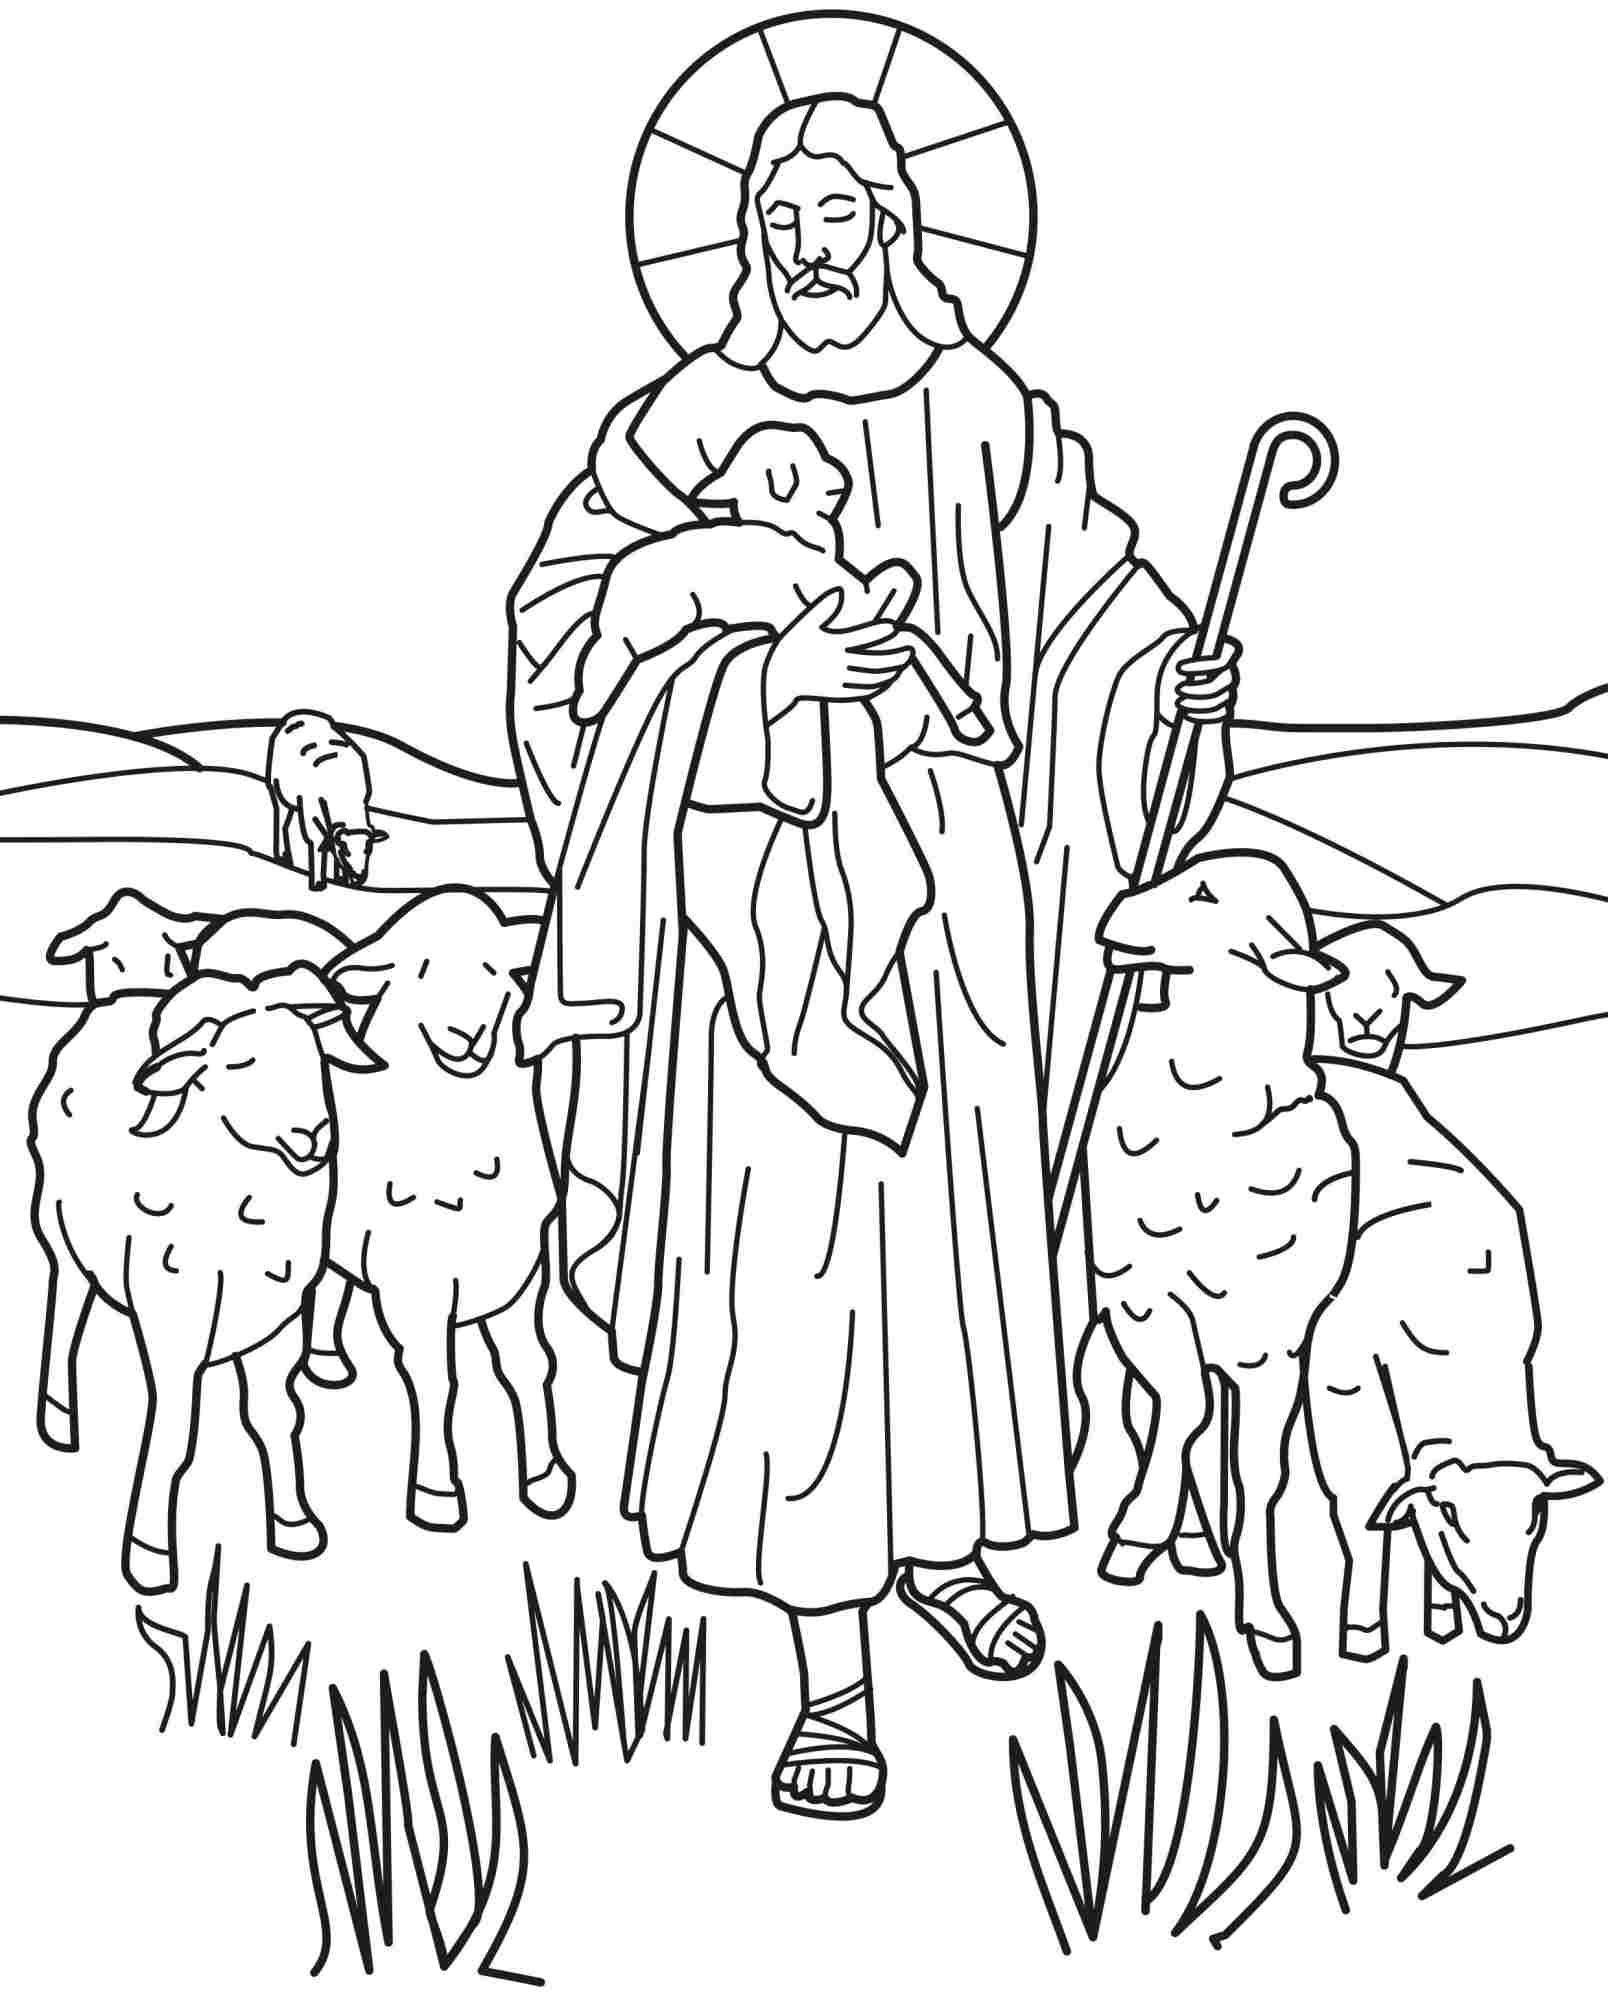 the-best-free-religious-coloring-page-images-download-from-1114-free